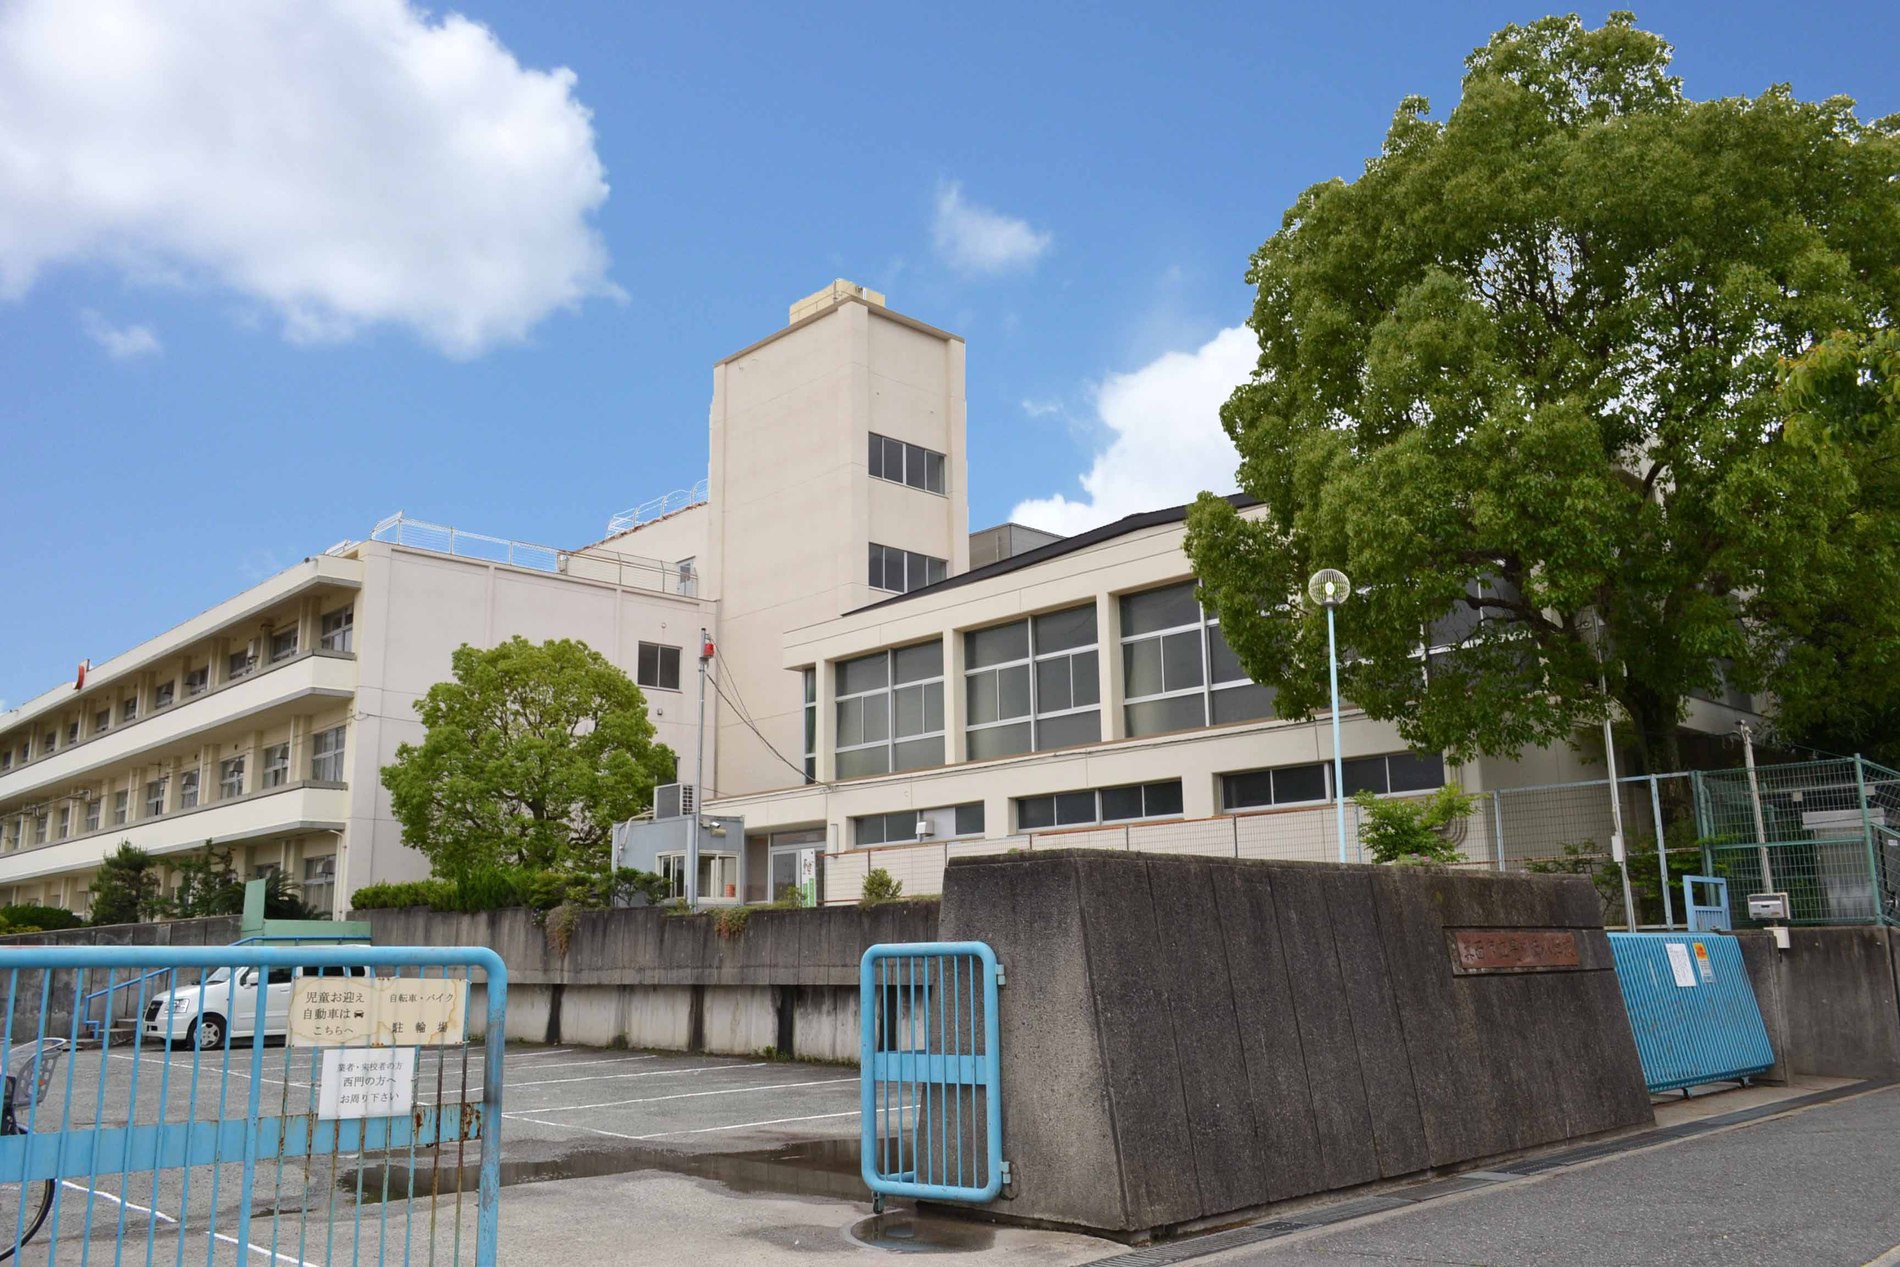 Primary school. 250m to Minami Toyokawa Elementary School  [3-minute walk] To enrich the day-to-day lessons, In advance of the fun it can be seen teaching building for the children of each and every Minami Toyokawa Elementary School, Personal computers and English, Full opportunities to touch, such as the handicraft. Likely to learn fun and friends